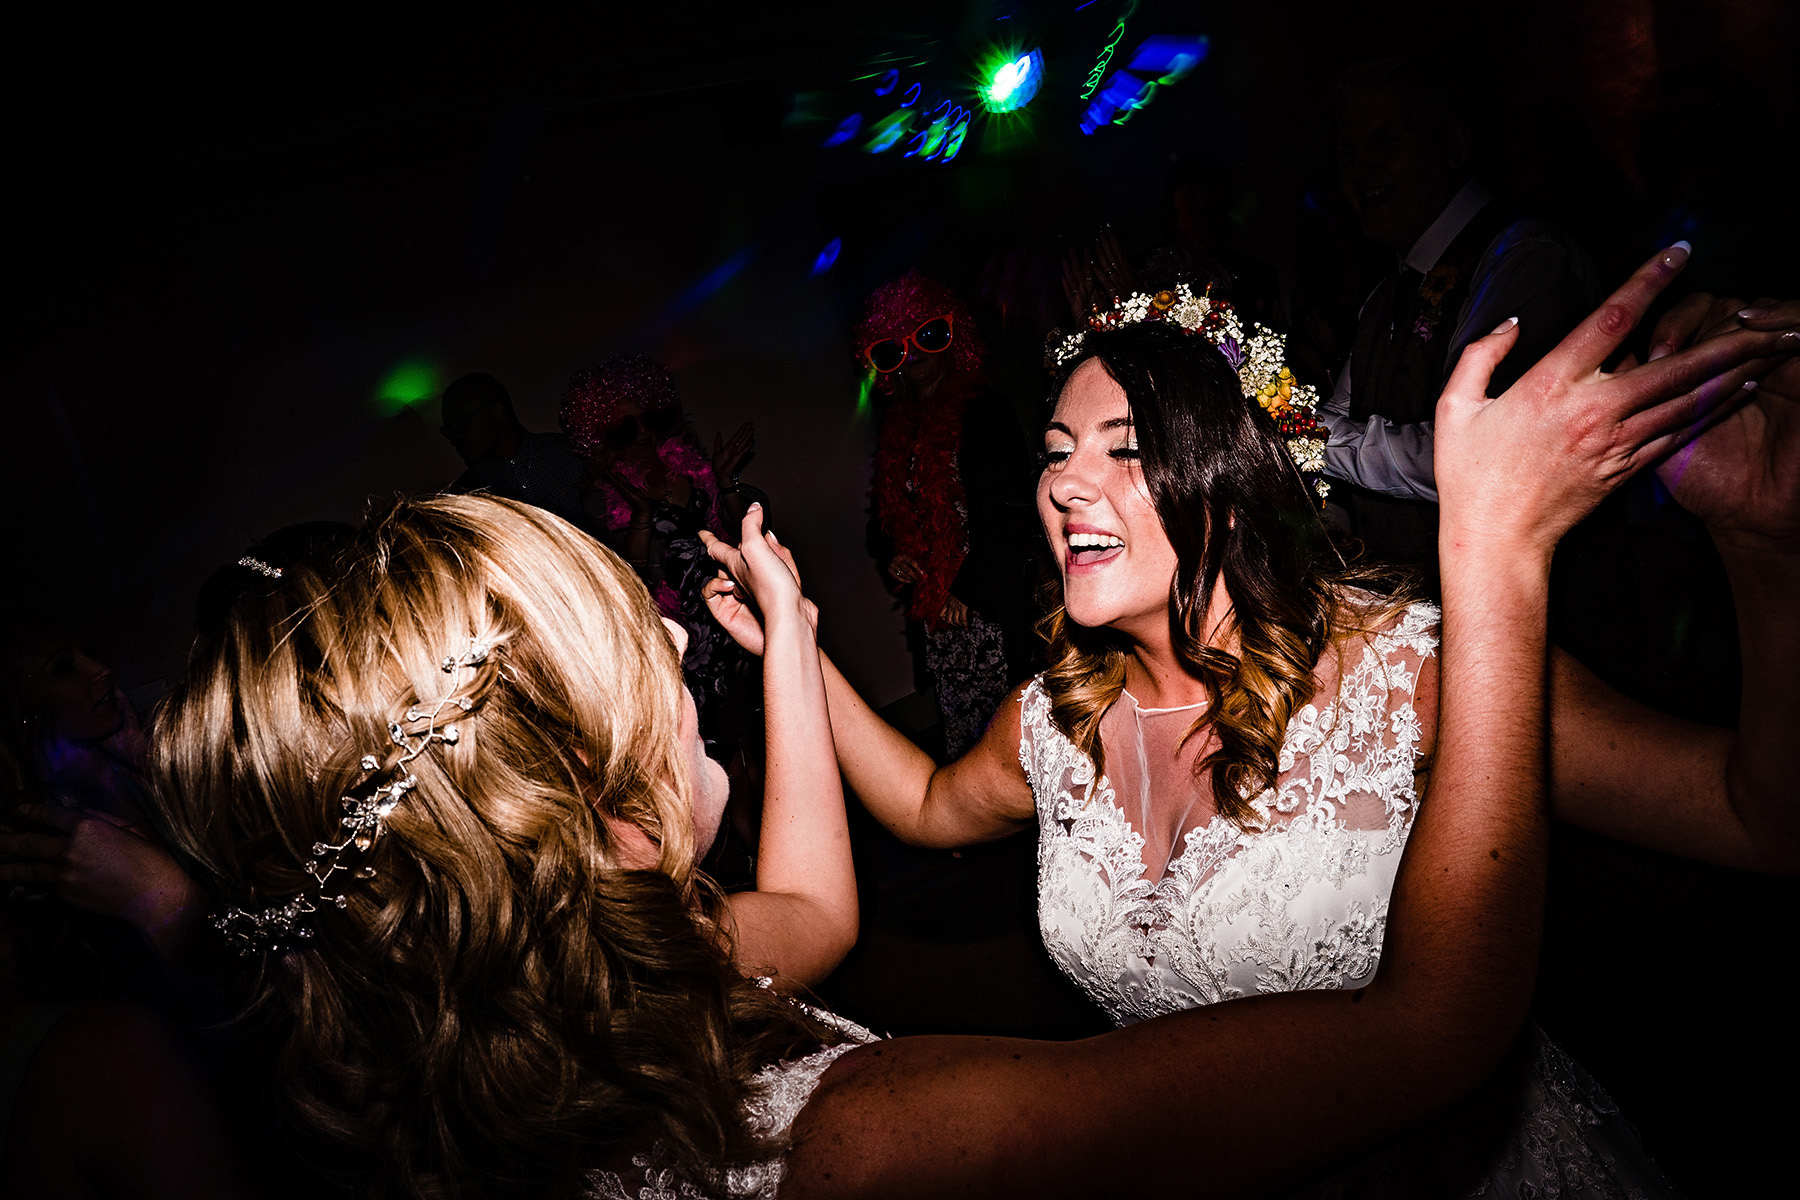 the two brides getting down on the dance floor